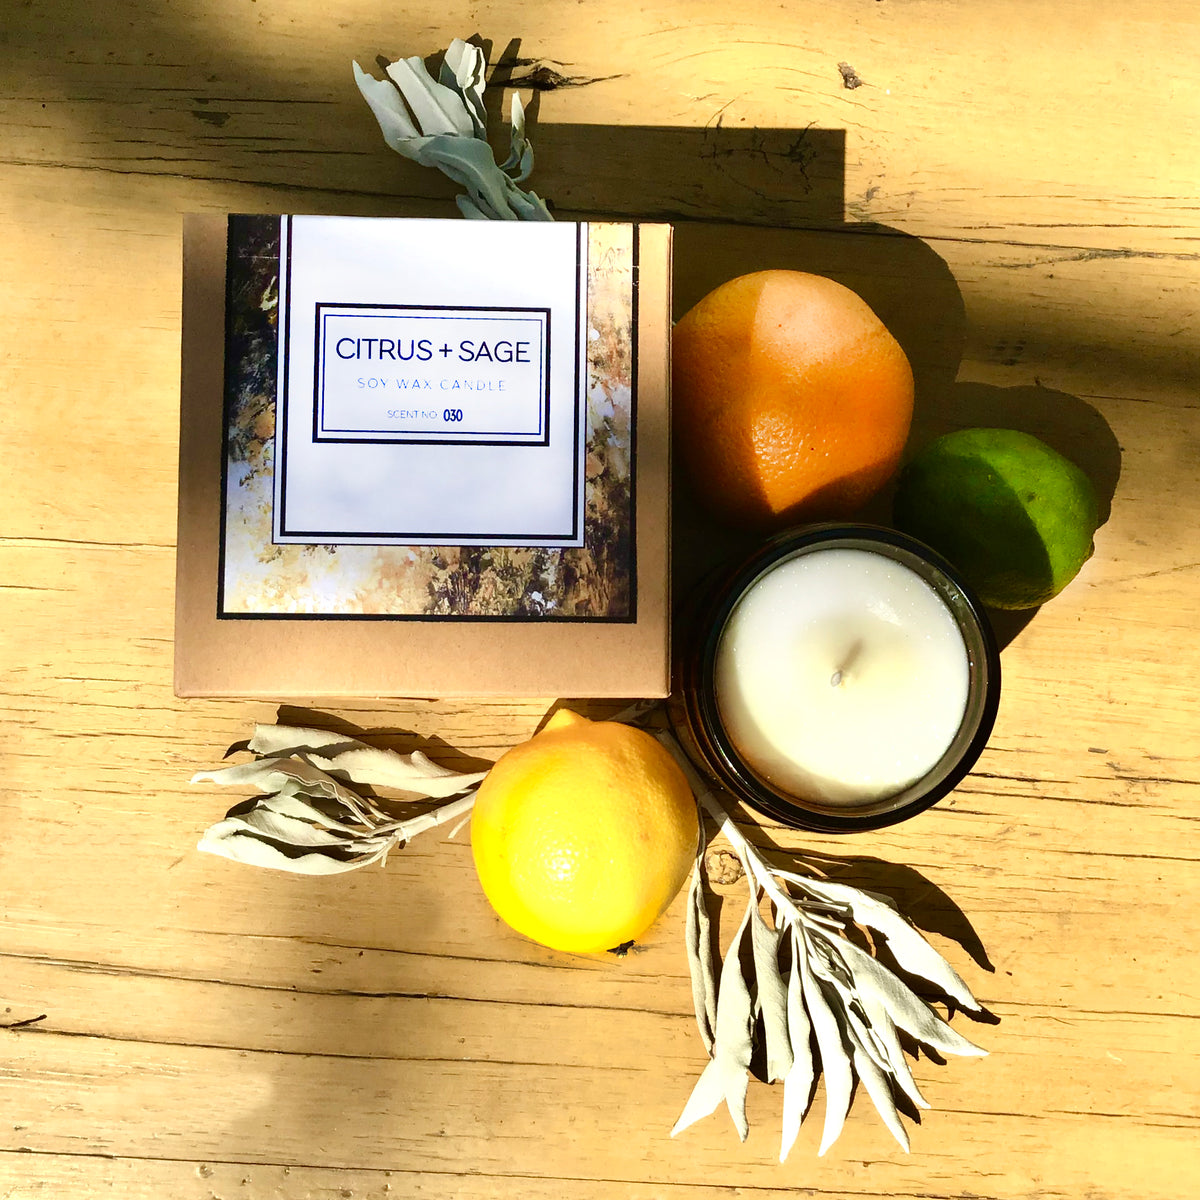 Citrus + Sage Soy Wax Candle